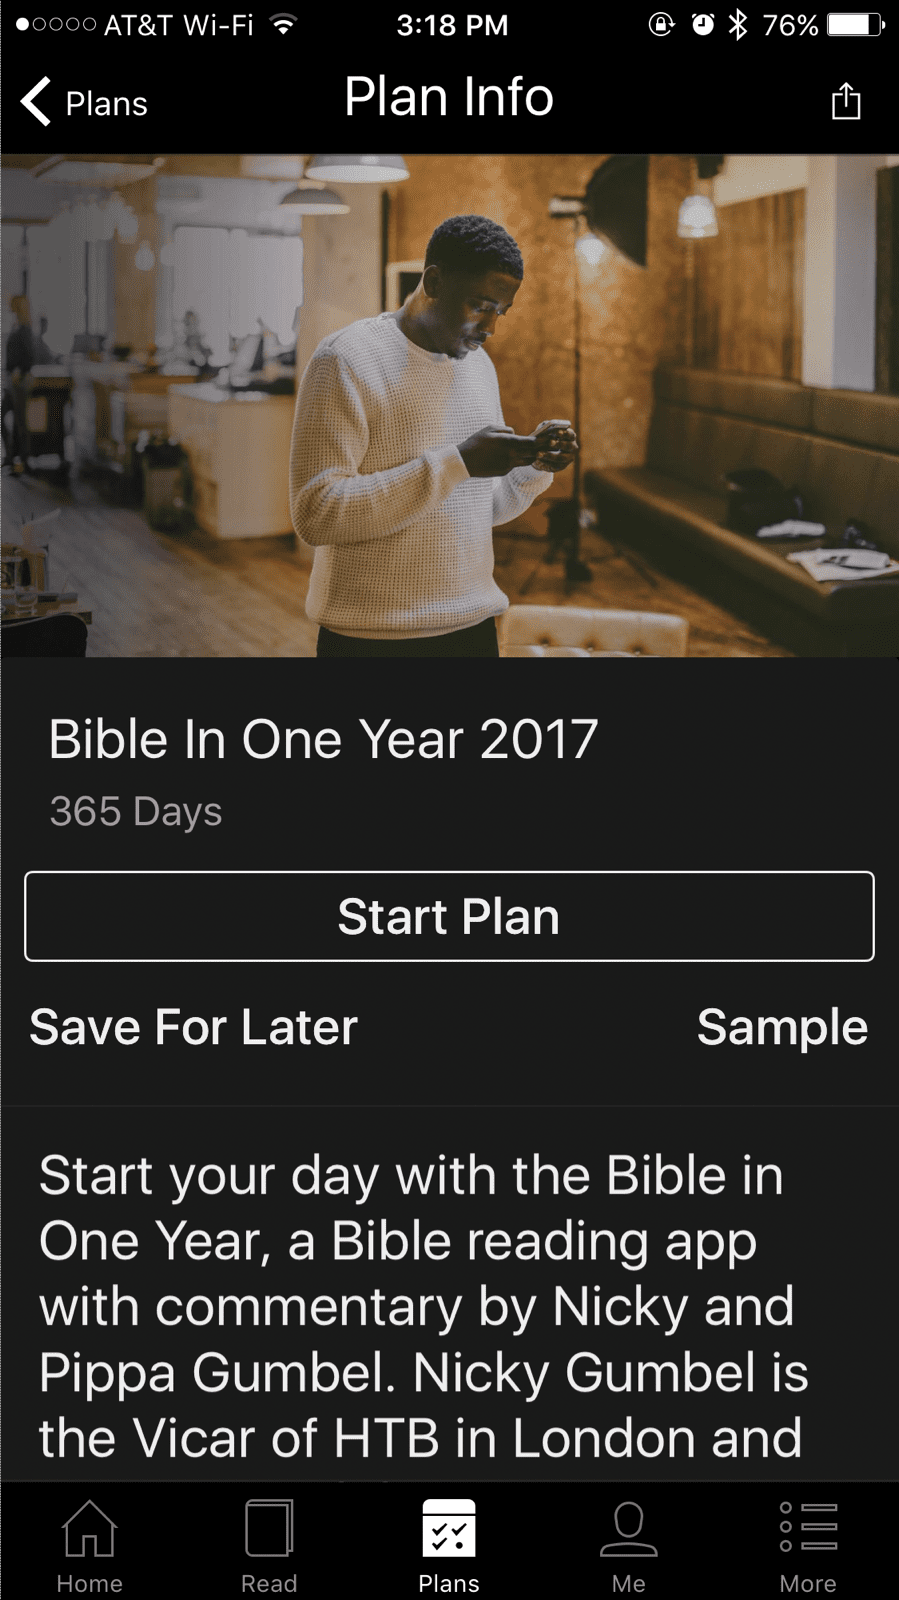 Read through the Bible in One Year